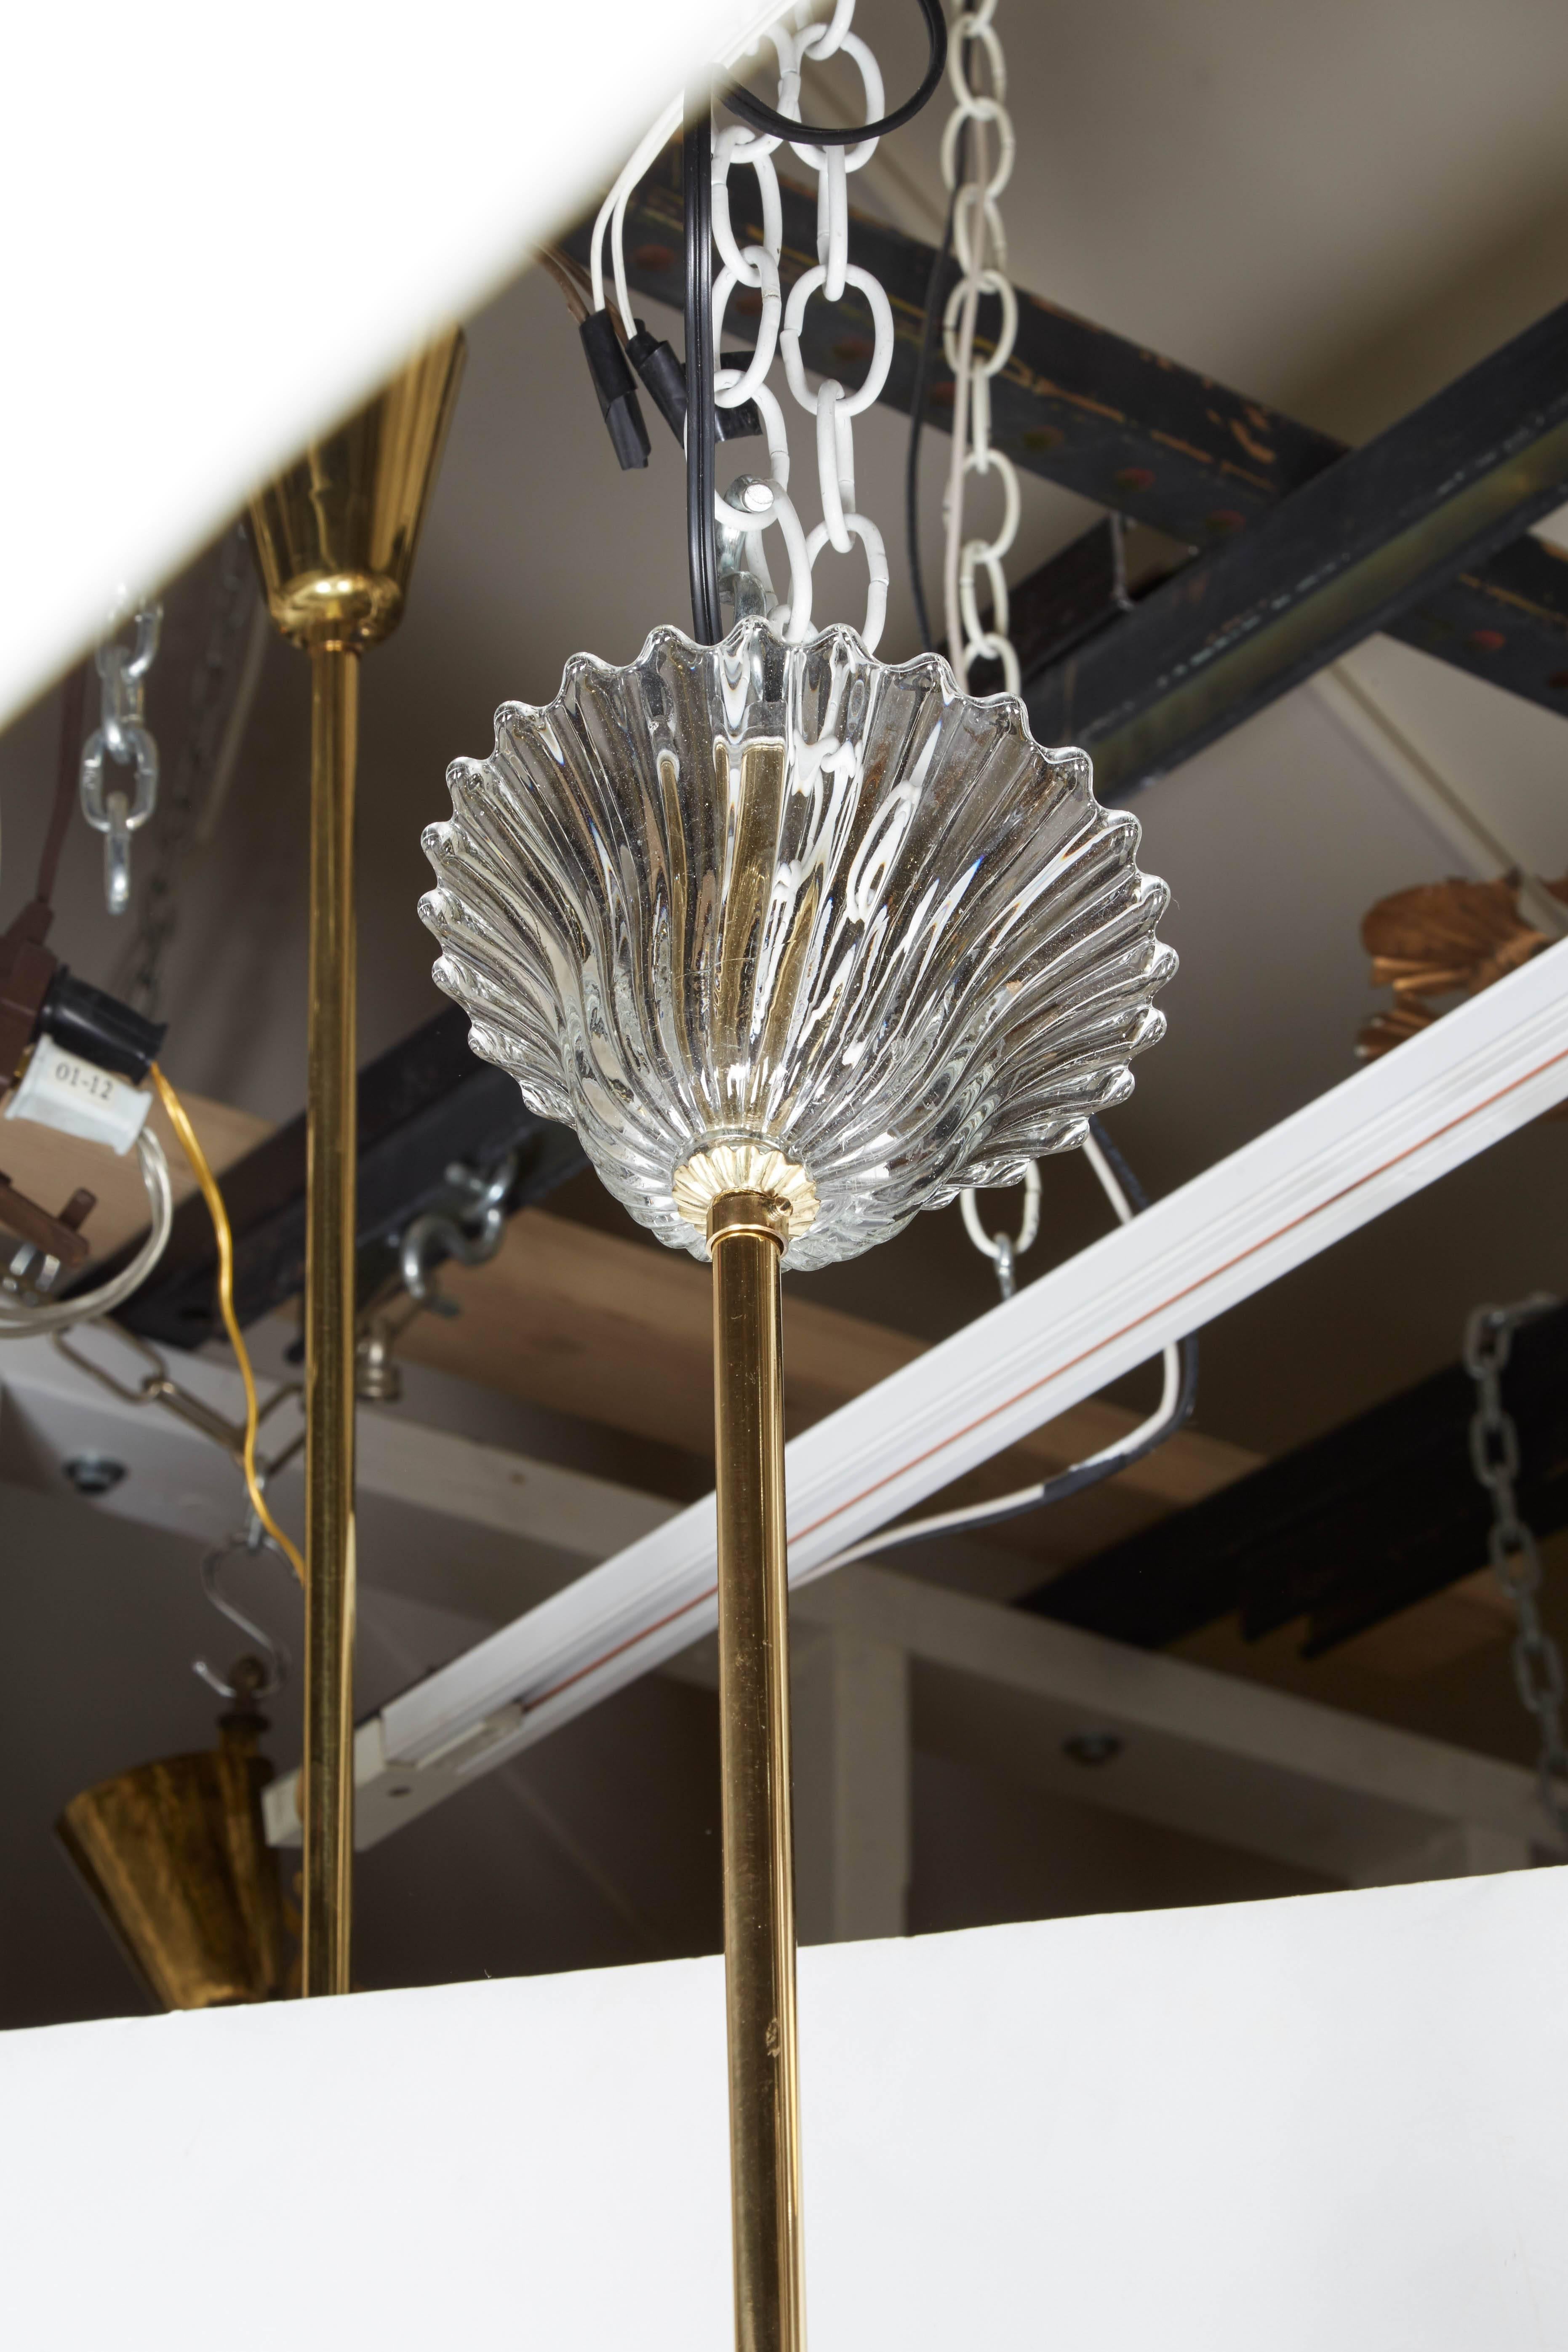 Perfect for a light and airy feeling room is this Italian, 1950s chandelier. The body of the chandelier is polished brass and supports 5 arms of light. Hand formed clear glass fronds extend from the central bowl. Clear blown glass bobeche sit atop